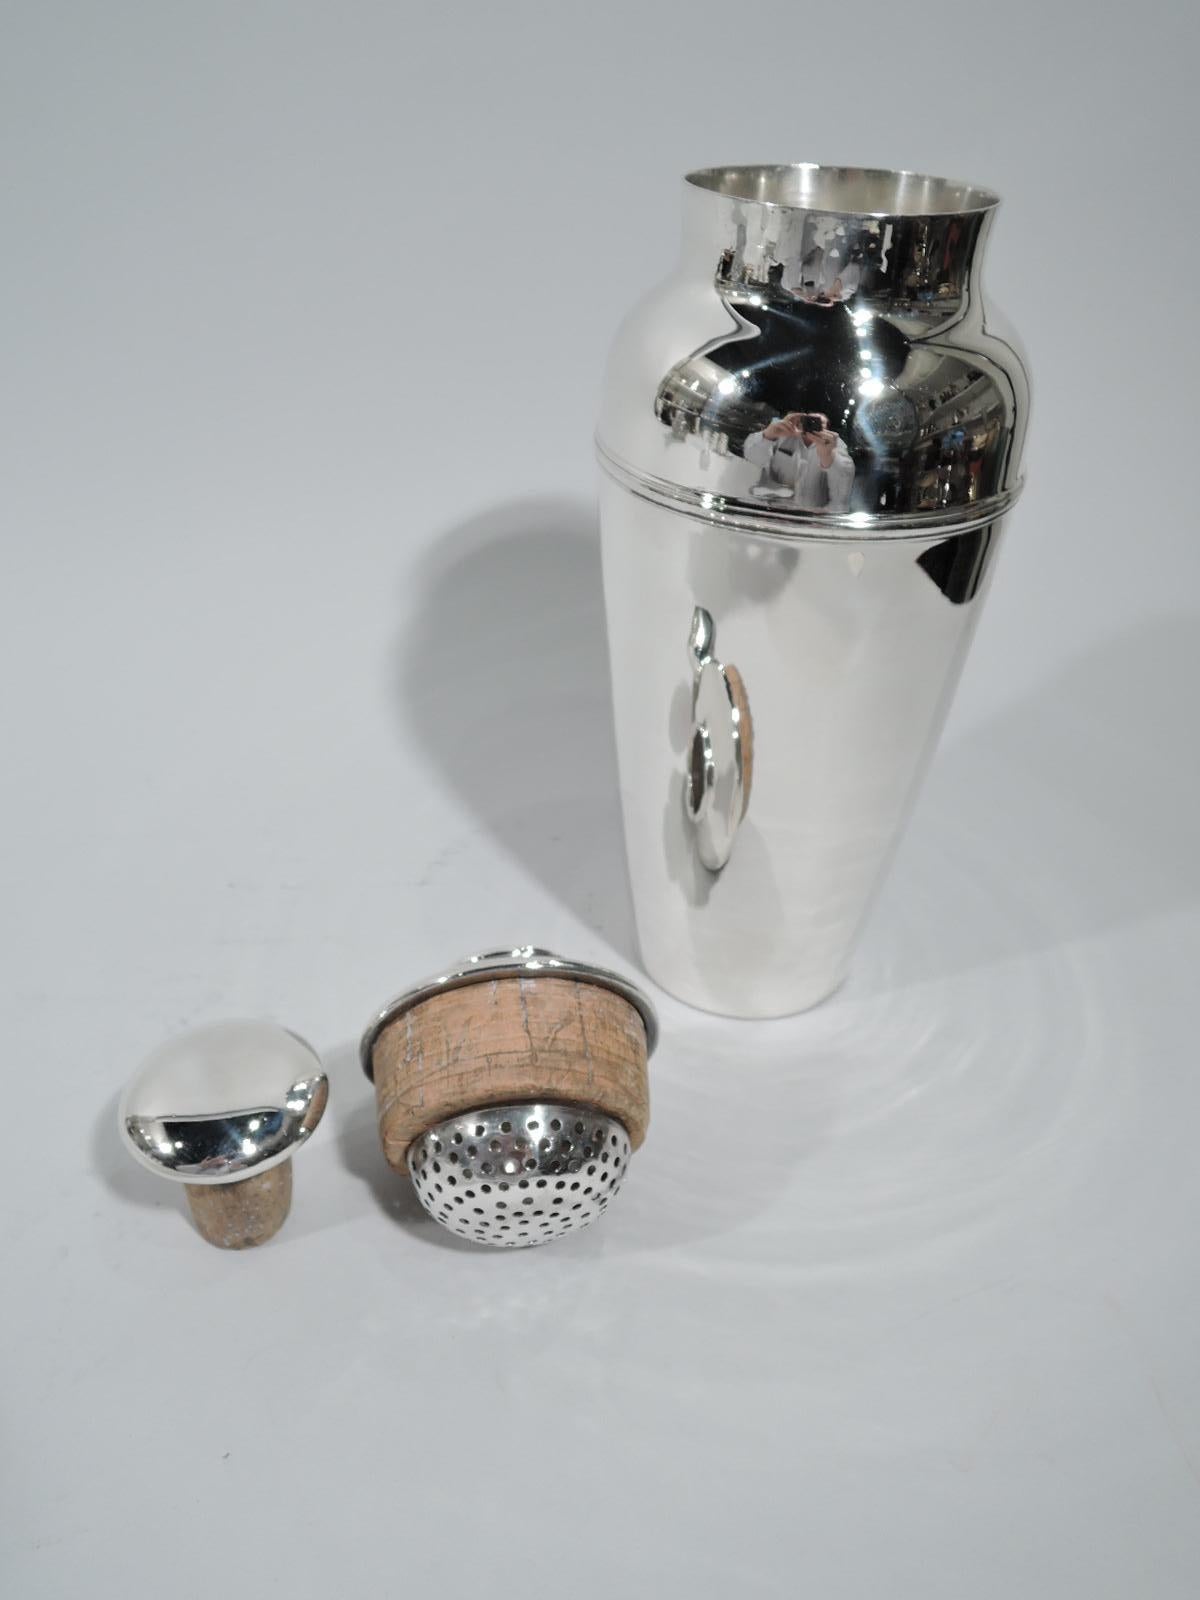 Art Deco sterling silver cocktail shaker. Made by Tiffany & Co. in New York, circa 1922. Tapering bowl with curved shoulder and short inset neck. Cover flat and overhanging with hemispheric strainer mounted to cork plug. Cover top has CAP with cork